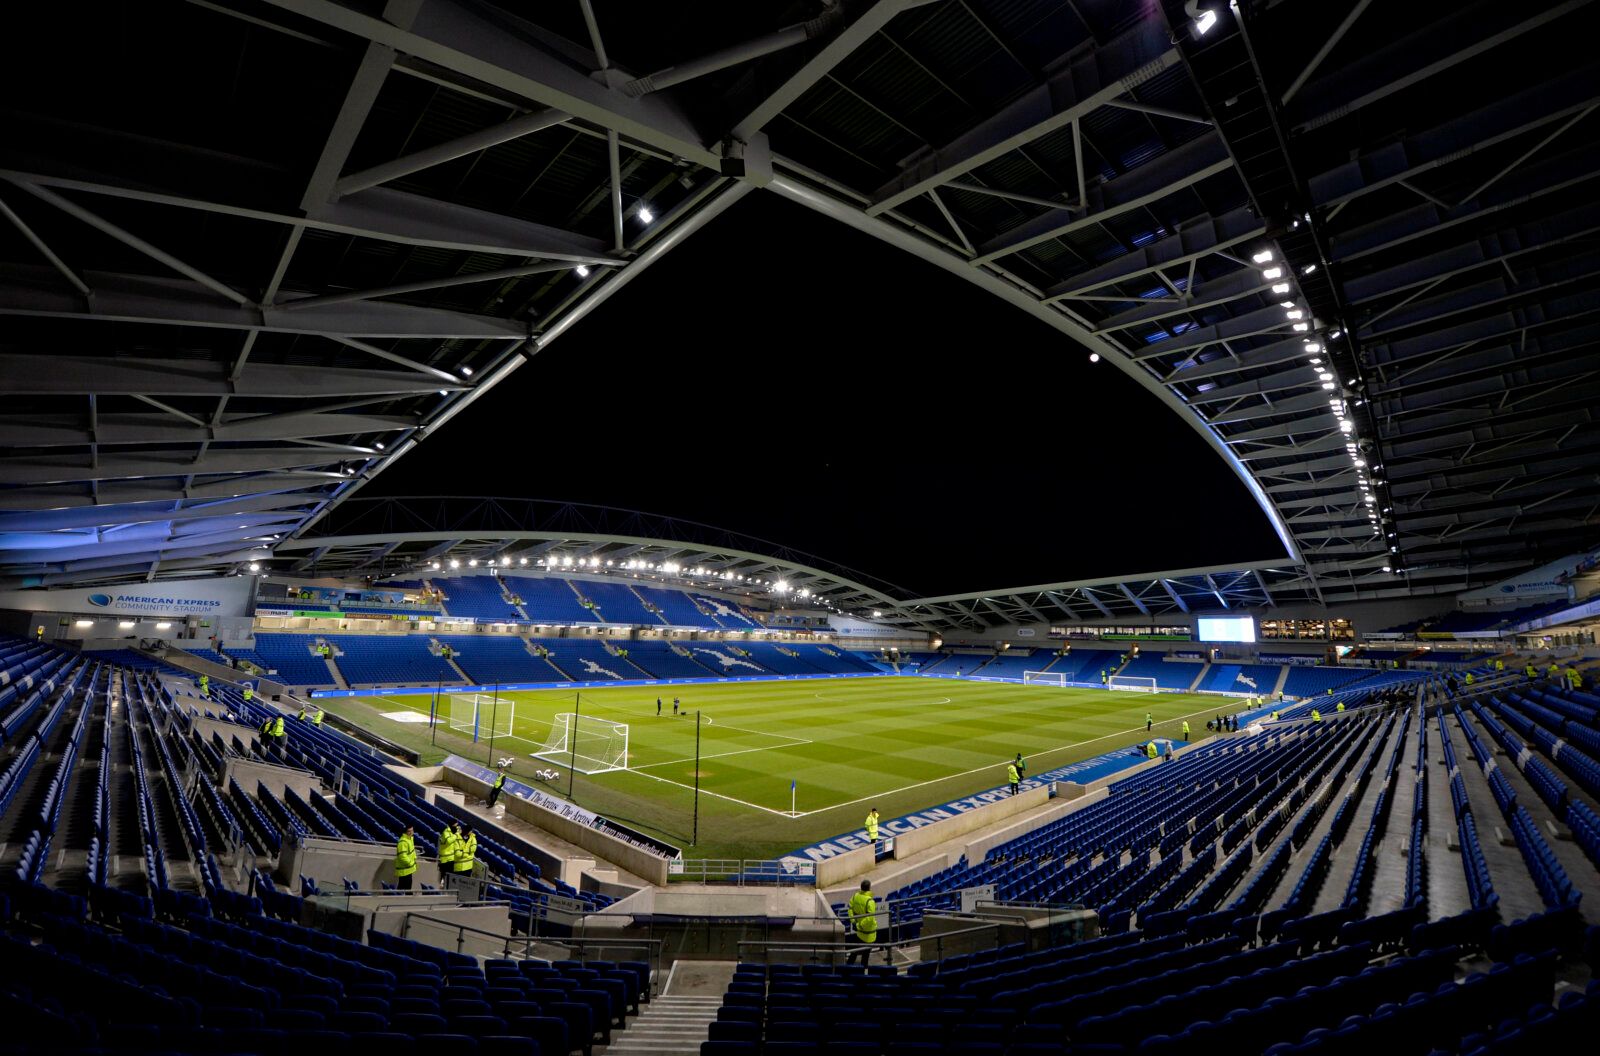 Football - Brighton &amp; Hove Albion v Derby County - Sky Bet Football League Championship - The American Express Community Stadium - 3/3/15 
General view of The Amex Community Stadium  before the game 
Mandatory Credit: Action Images / Adam Holt 
Livepic 
EDITORIAL USE ONLY. No use with unauthorized audio, video, data, fixture lists, club/league logos or "live" services. Online in-match use limited to 45 images, no video emulation. No use in betting, games or single club/league/player publicat